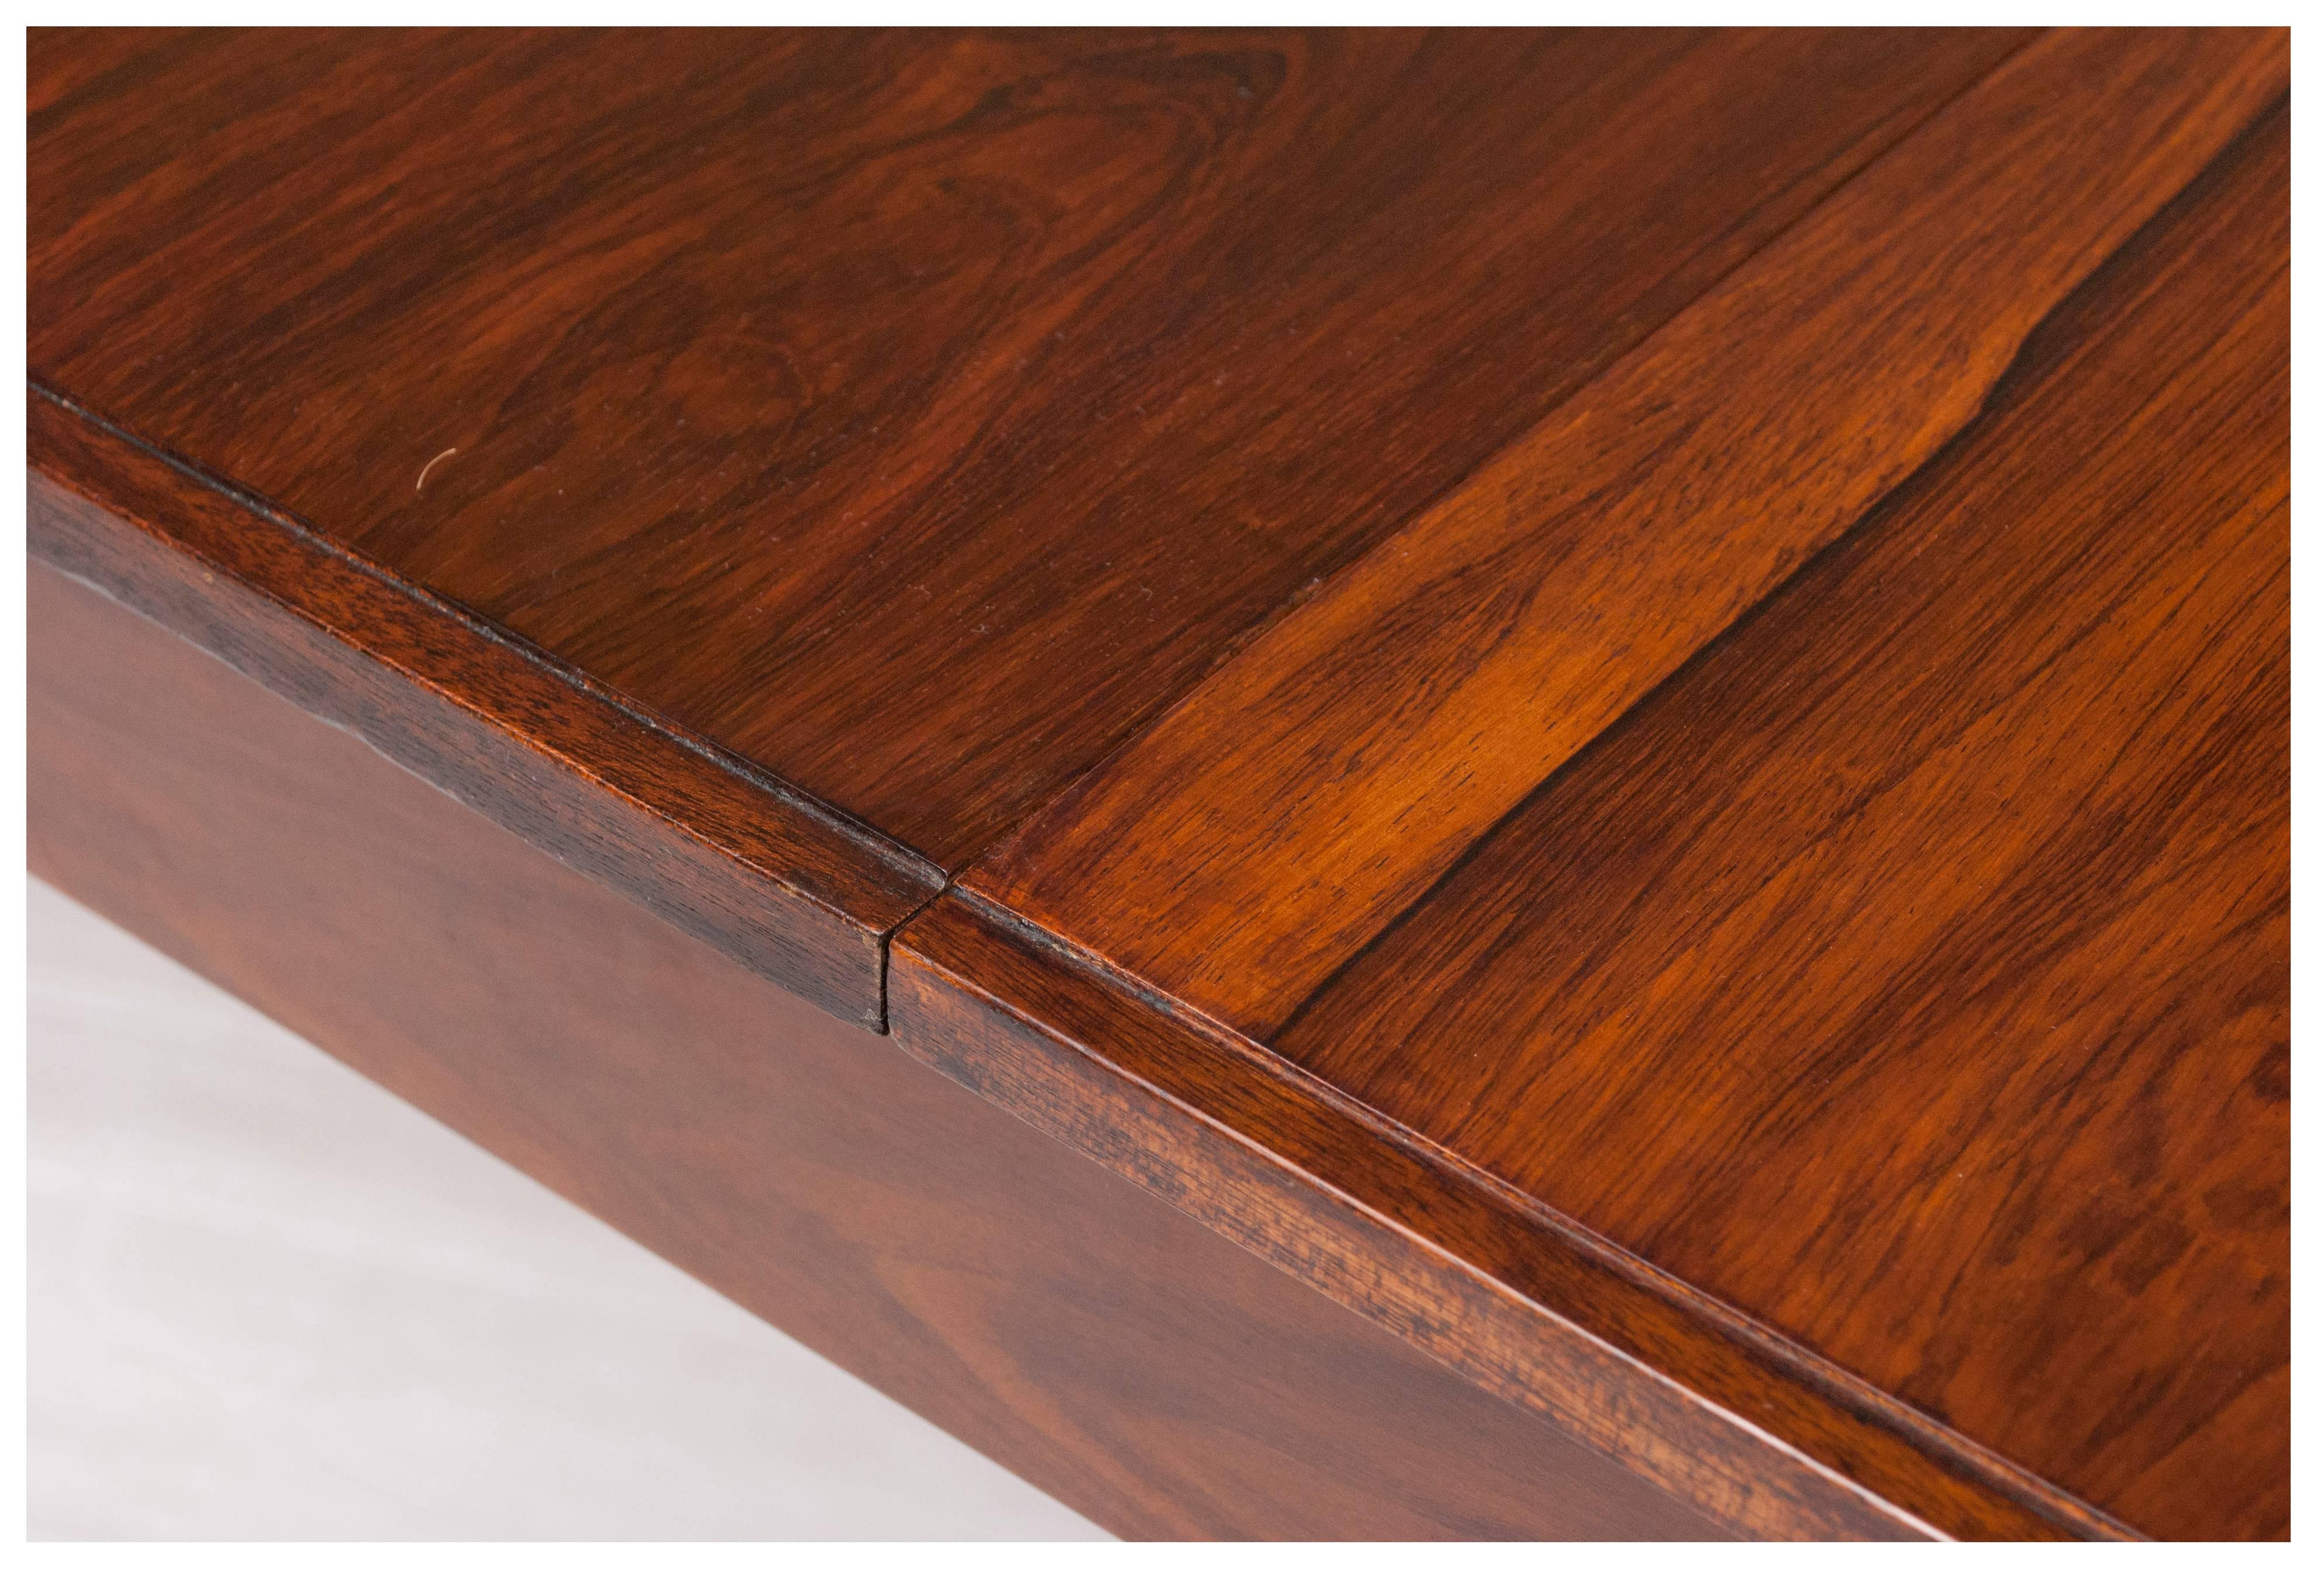 Mid-Century Danish extending rosewood 'Dorrington' dining table by Robert Heritage for Archie Shine, retailed exclusively by Heals. Extends to a maximum of 213cm in length.